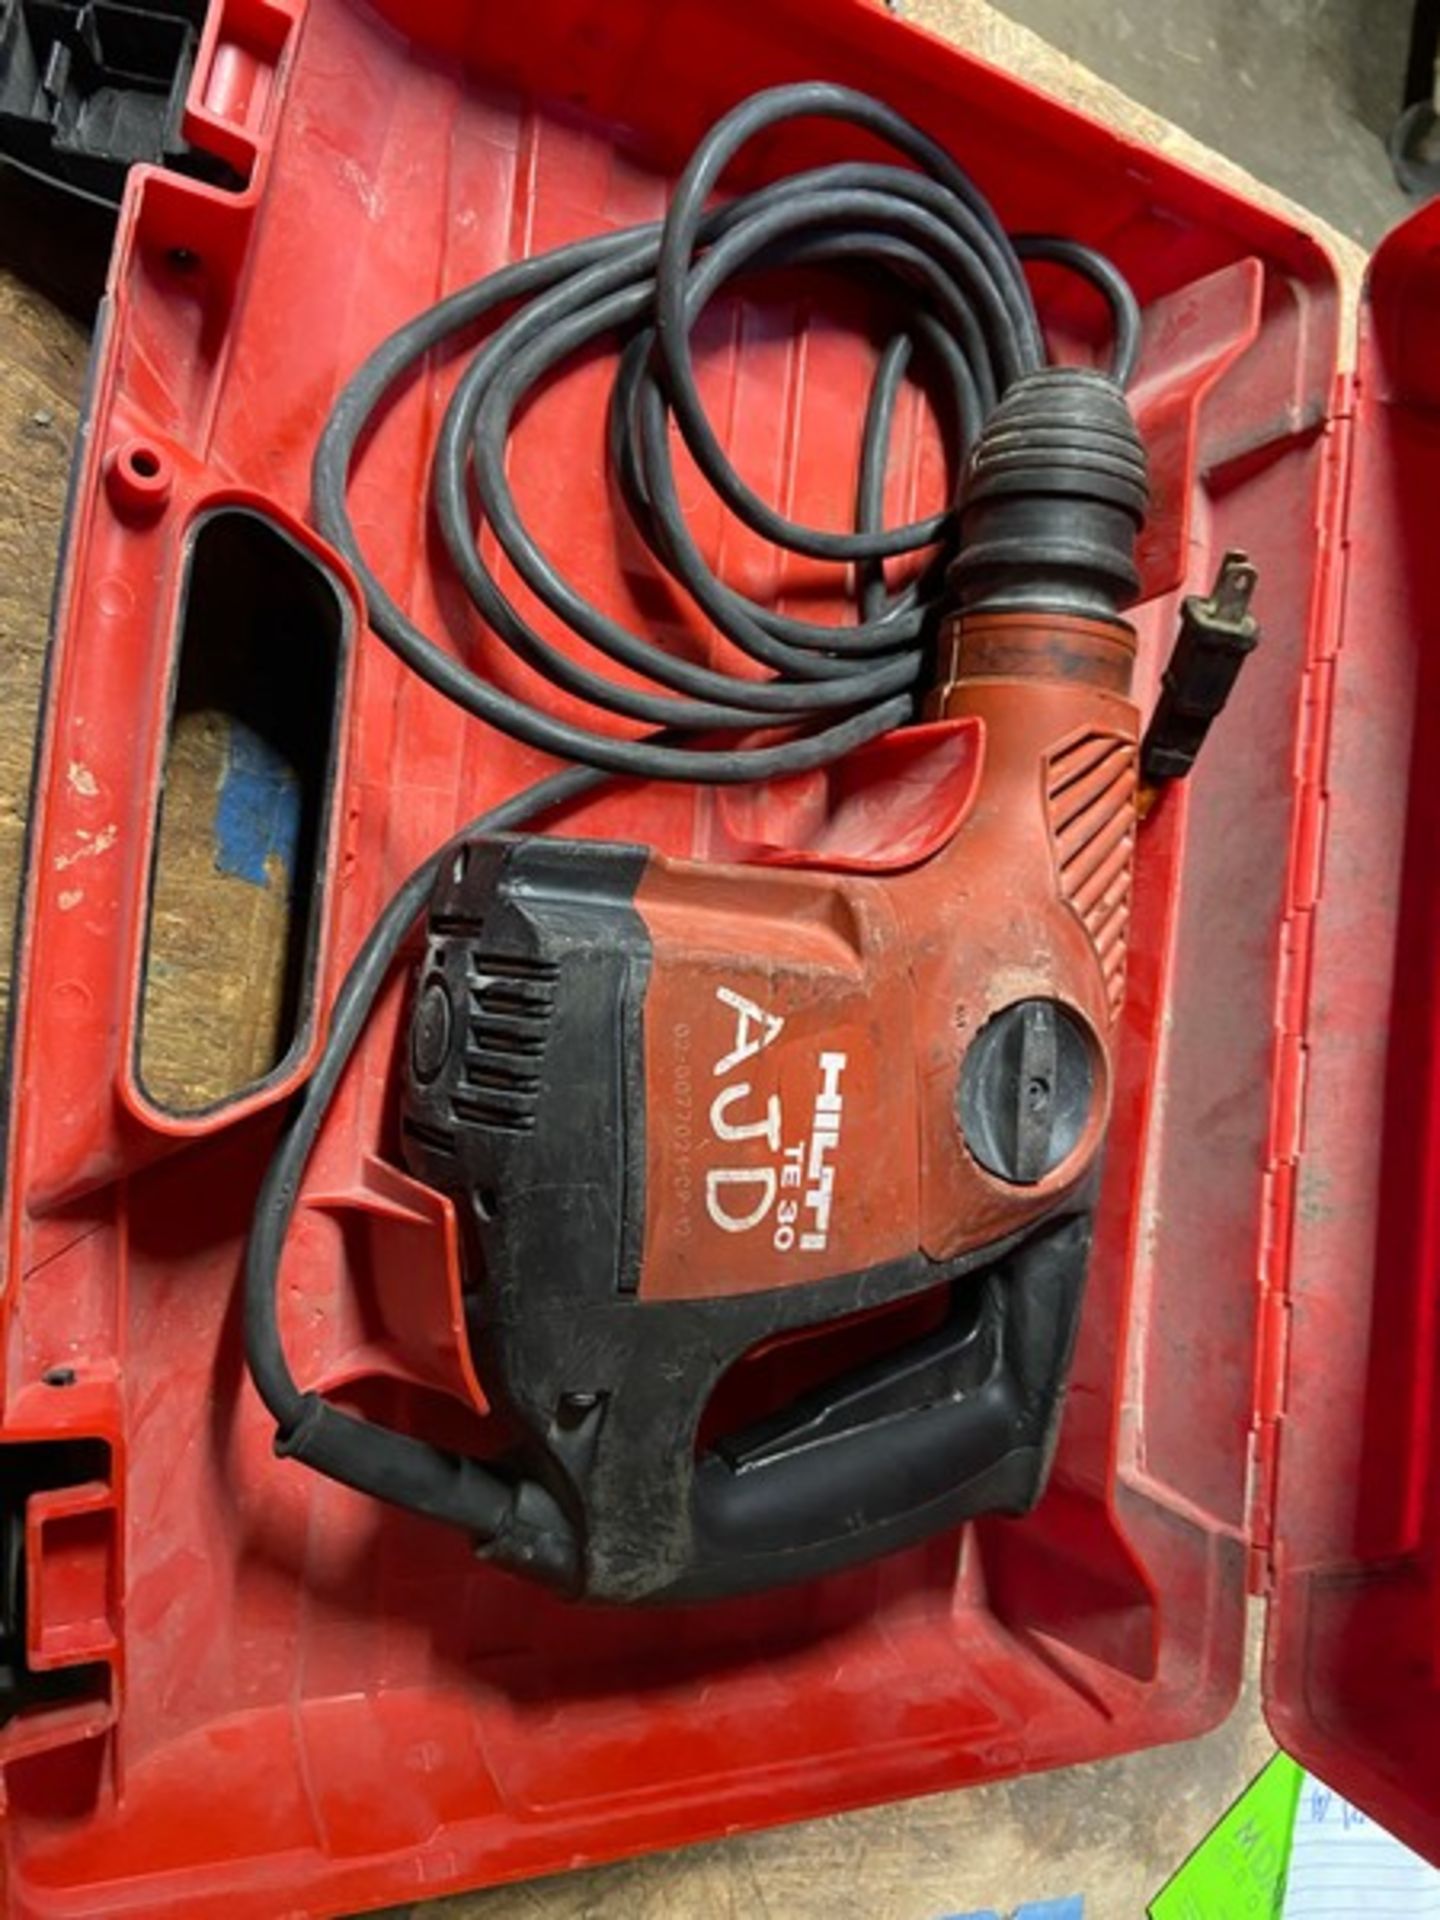 HILTI Rotary Hammer Drill, M/N TE 30, with Power Cord & Hard Case (LOCATED IN MONROEVILLE, PA) - Image 2 of 8